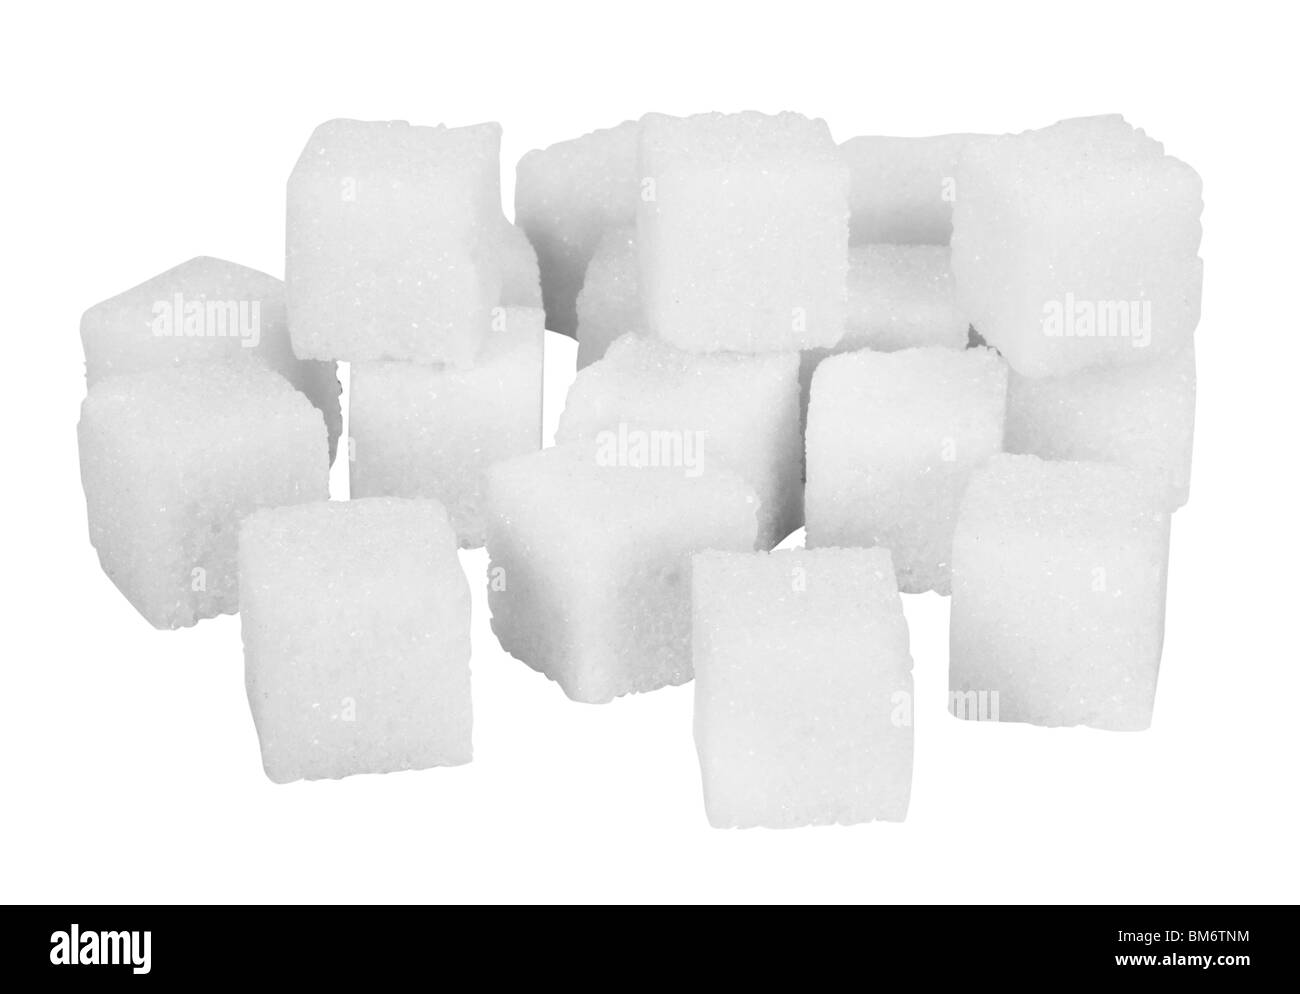 White sugar cubes Black and White Stock Photos & Images - Alamy